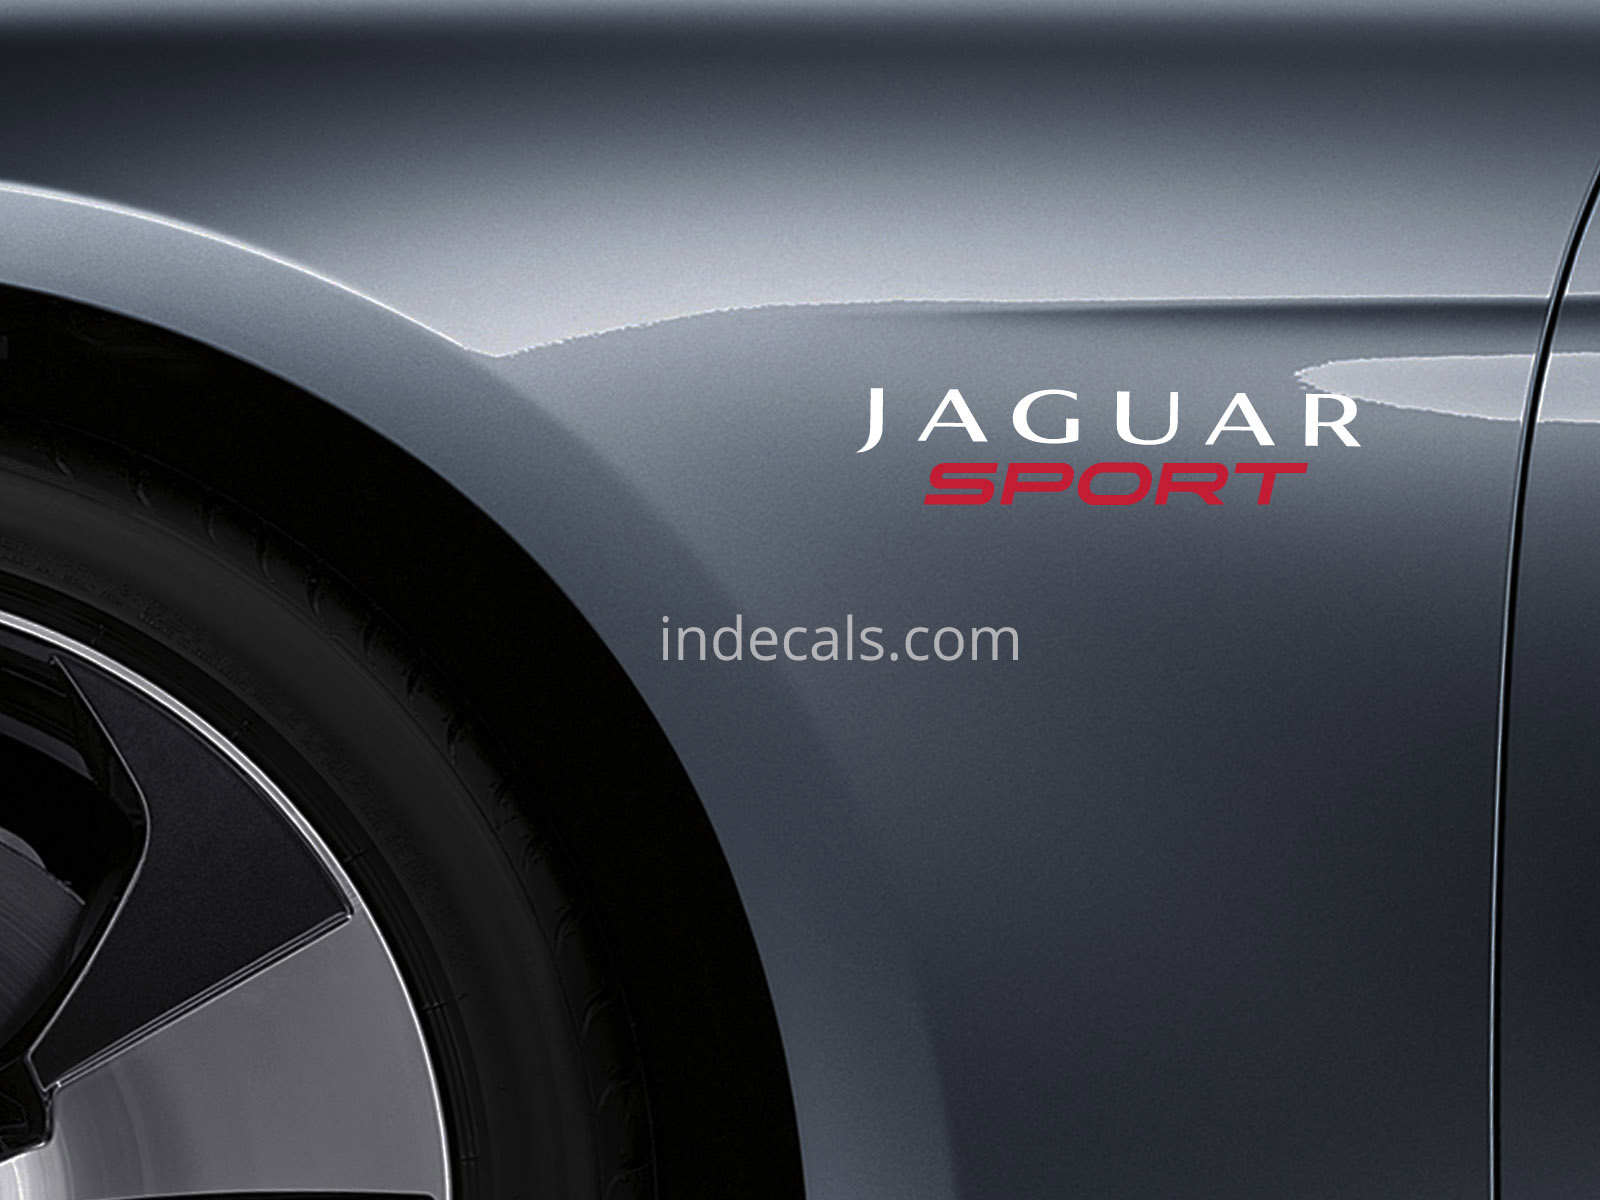 2 x Jaguar Sports Stickers for Wings - White & Red